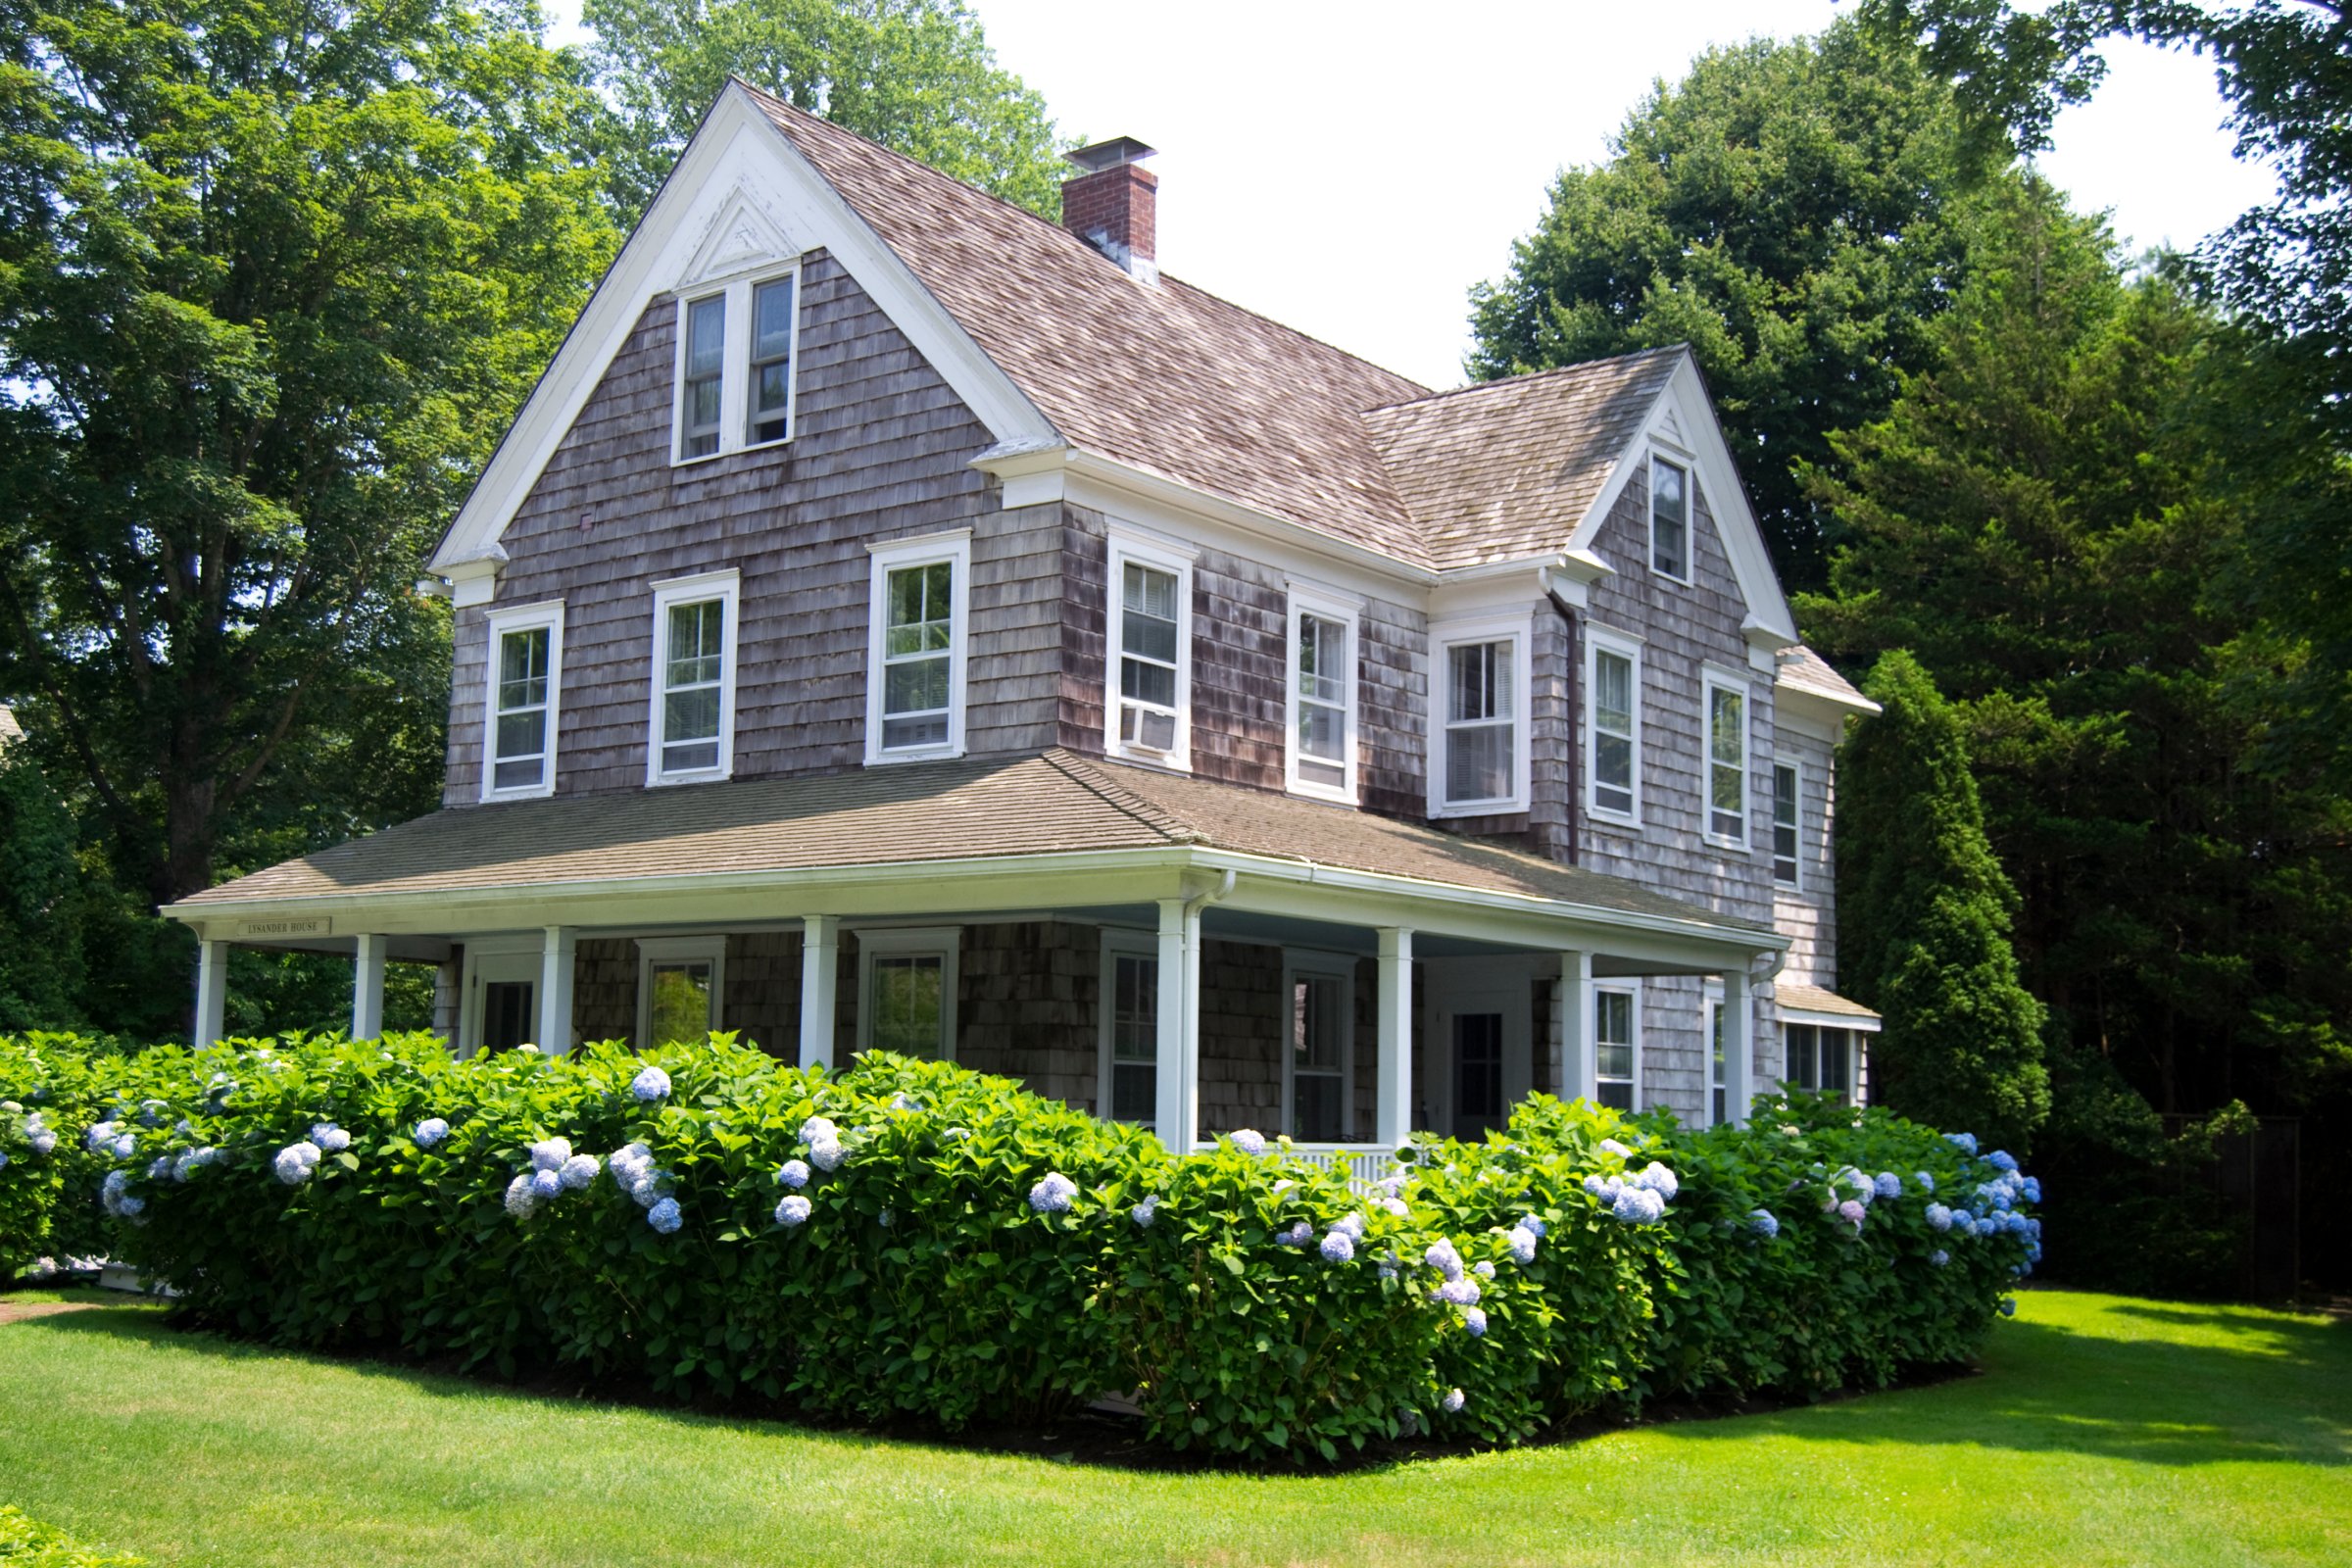 A traditional style Hamptons house